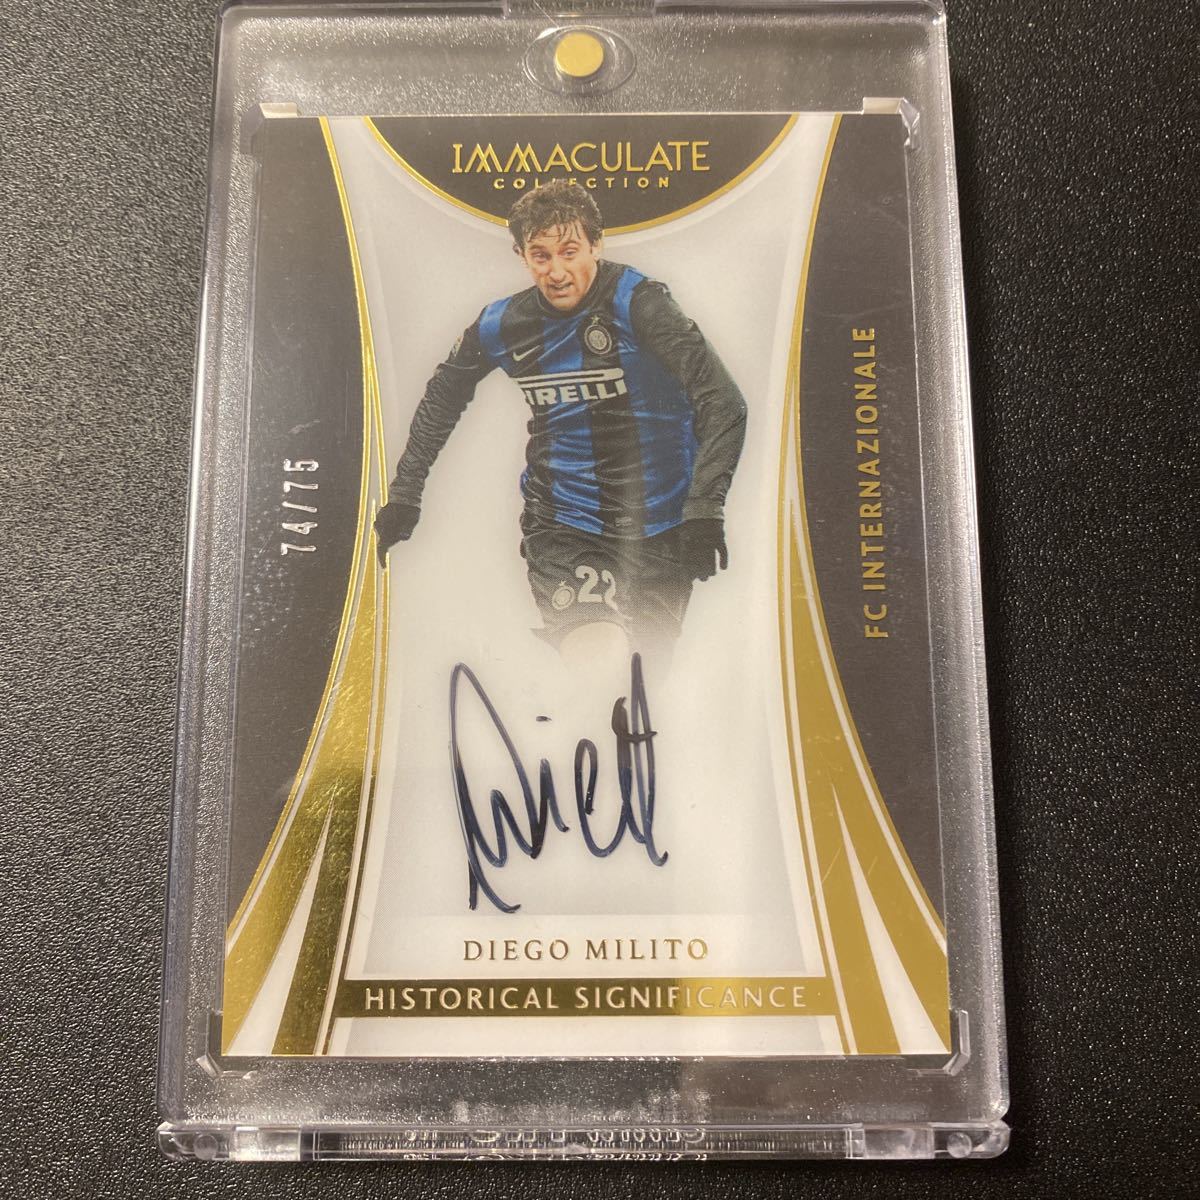 Diego Milito 2017 Panini Immaculate Historical Significance Auto 75枚限定 直筆サイン インテル ディエゴ ミリート